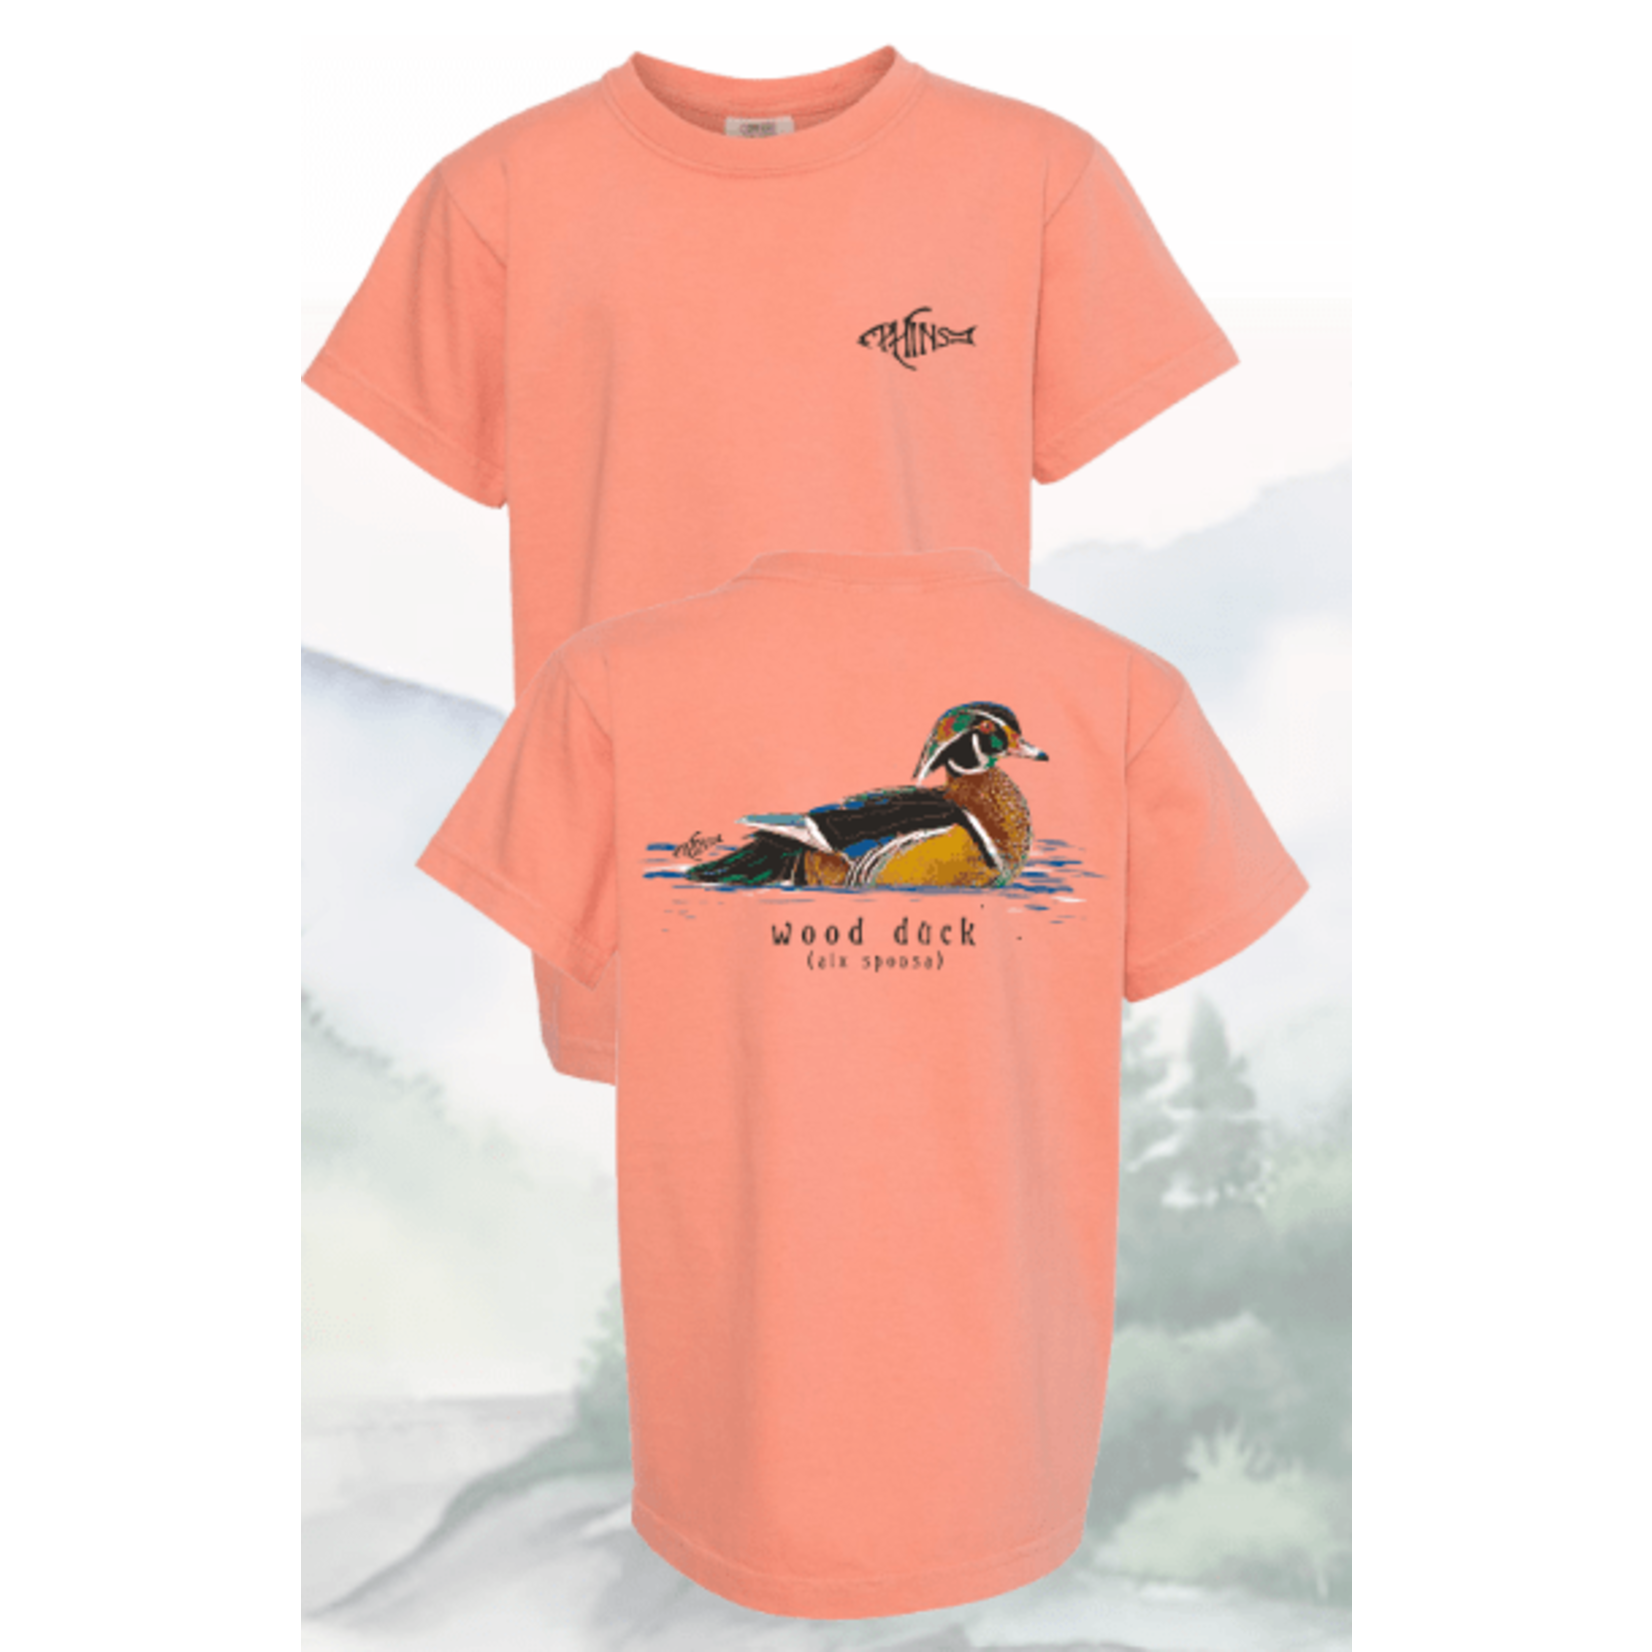 PHINS Apparel PHINS Apparel Youth Wood Duck S/S TEE Shirt